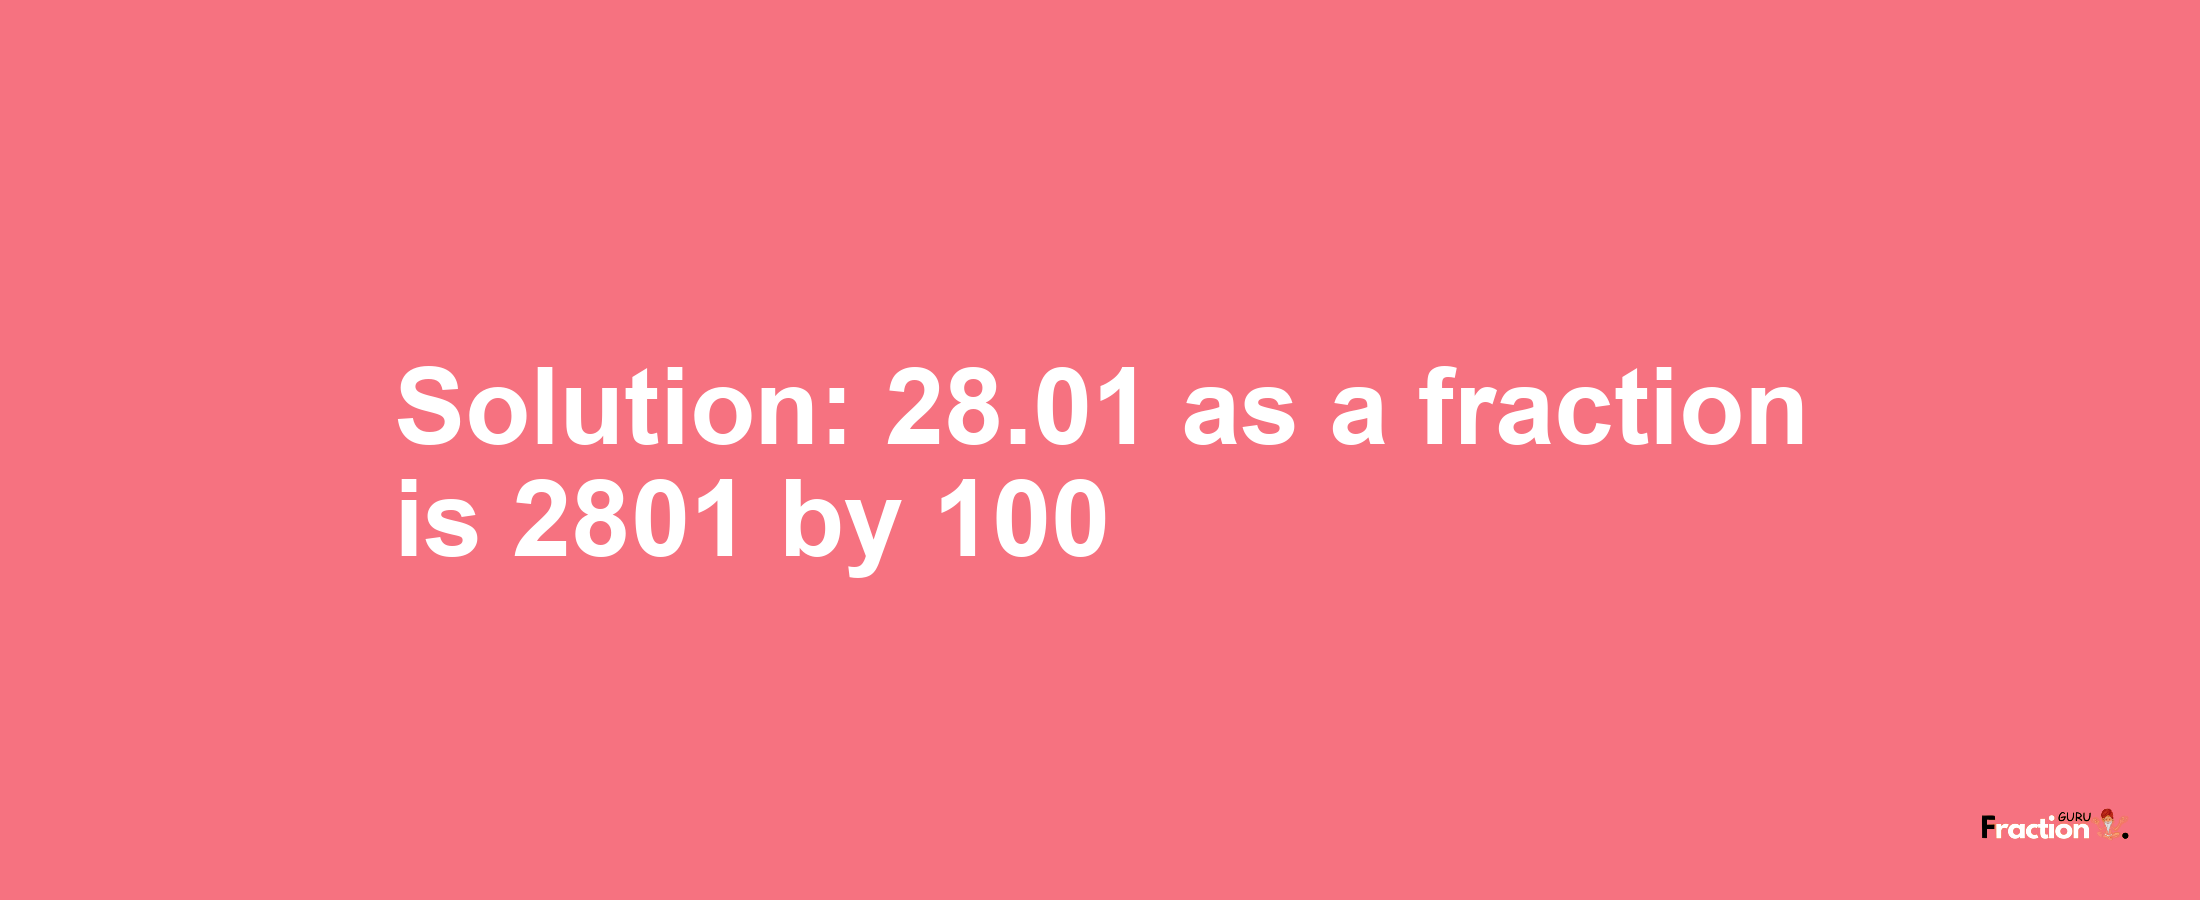 Solution:28.01 as a fraction is 2801/100